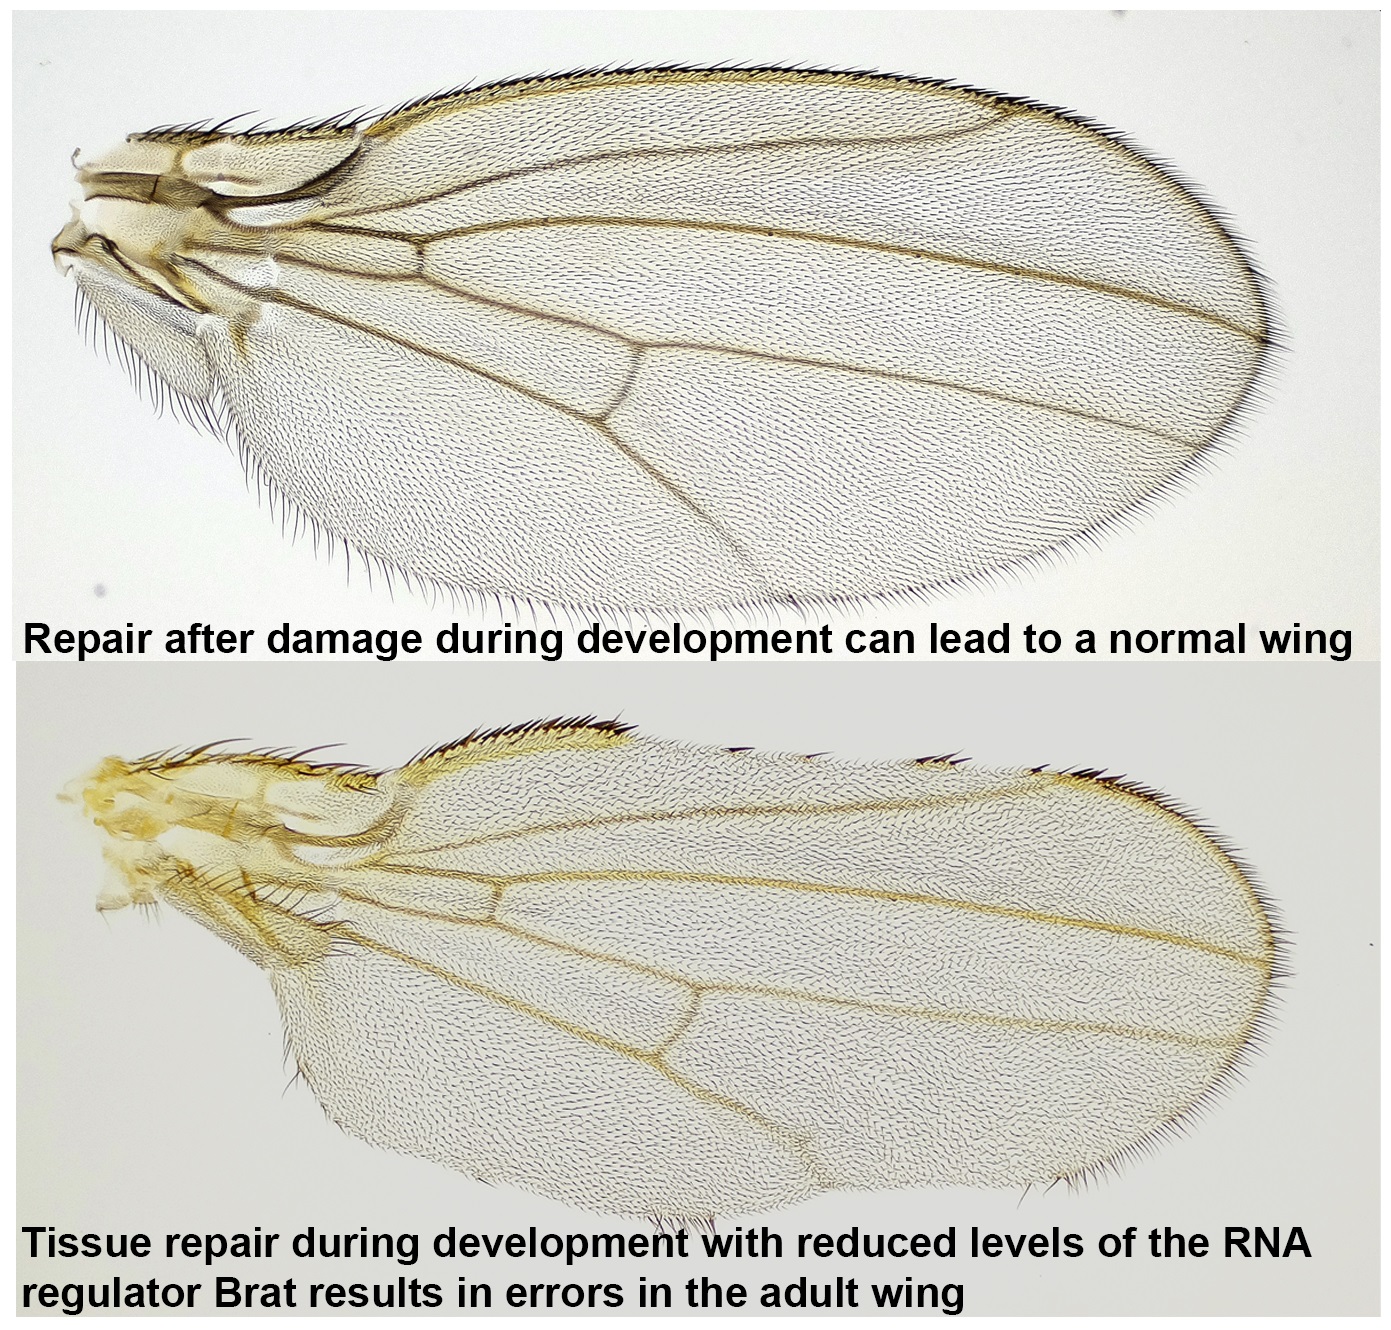 A comparison between control flies and Brat reduced flies. Repair after damage in control flies can lead to normal wings. Brat reduced flies result in errors in the wing patterning